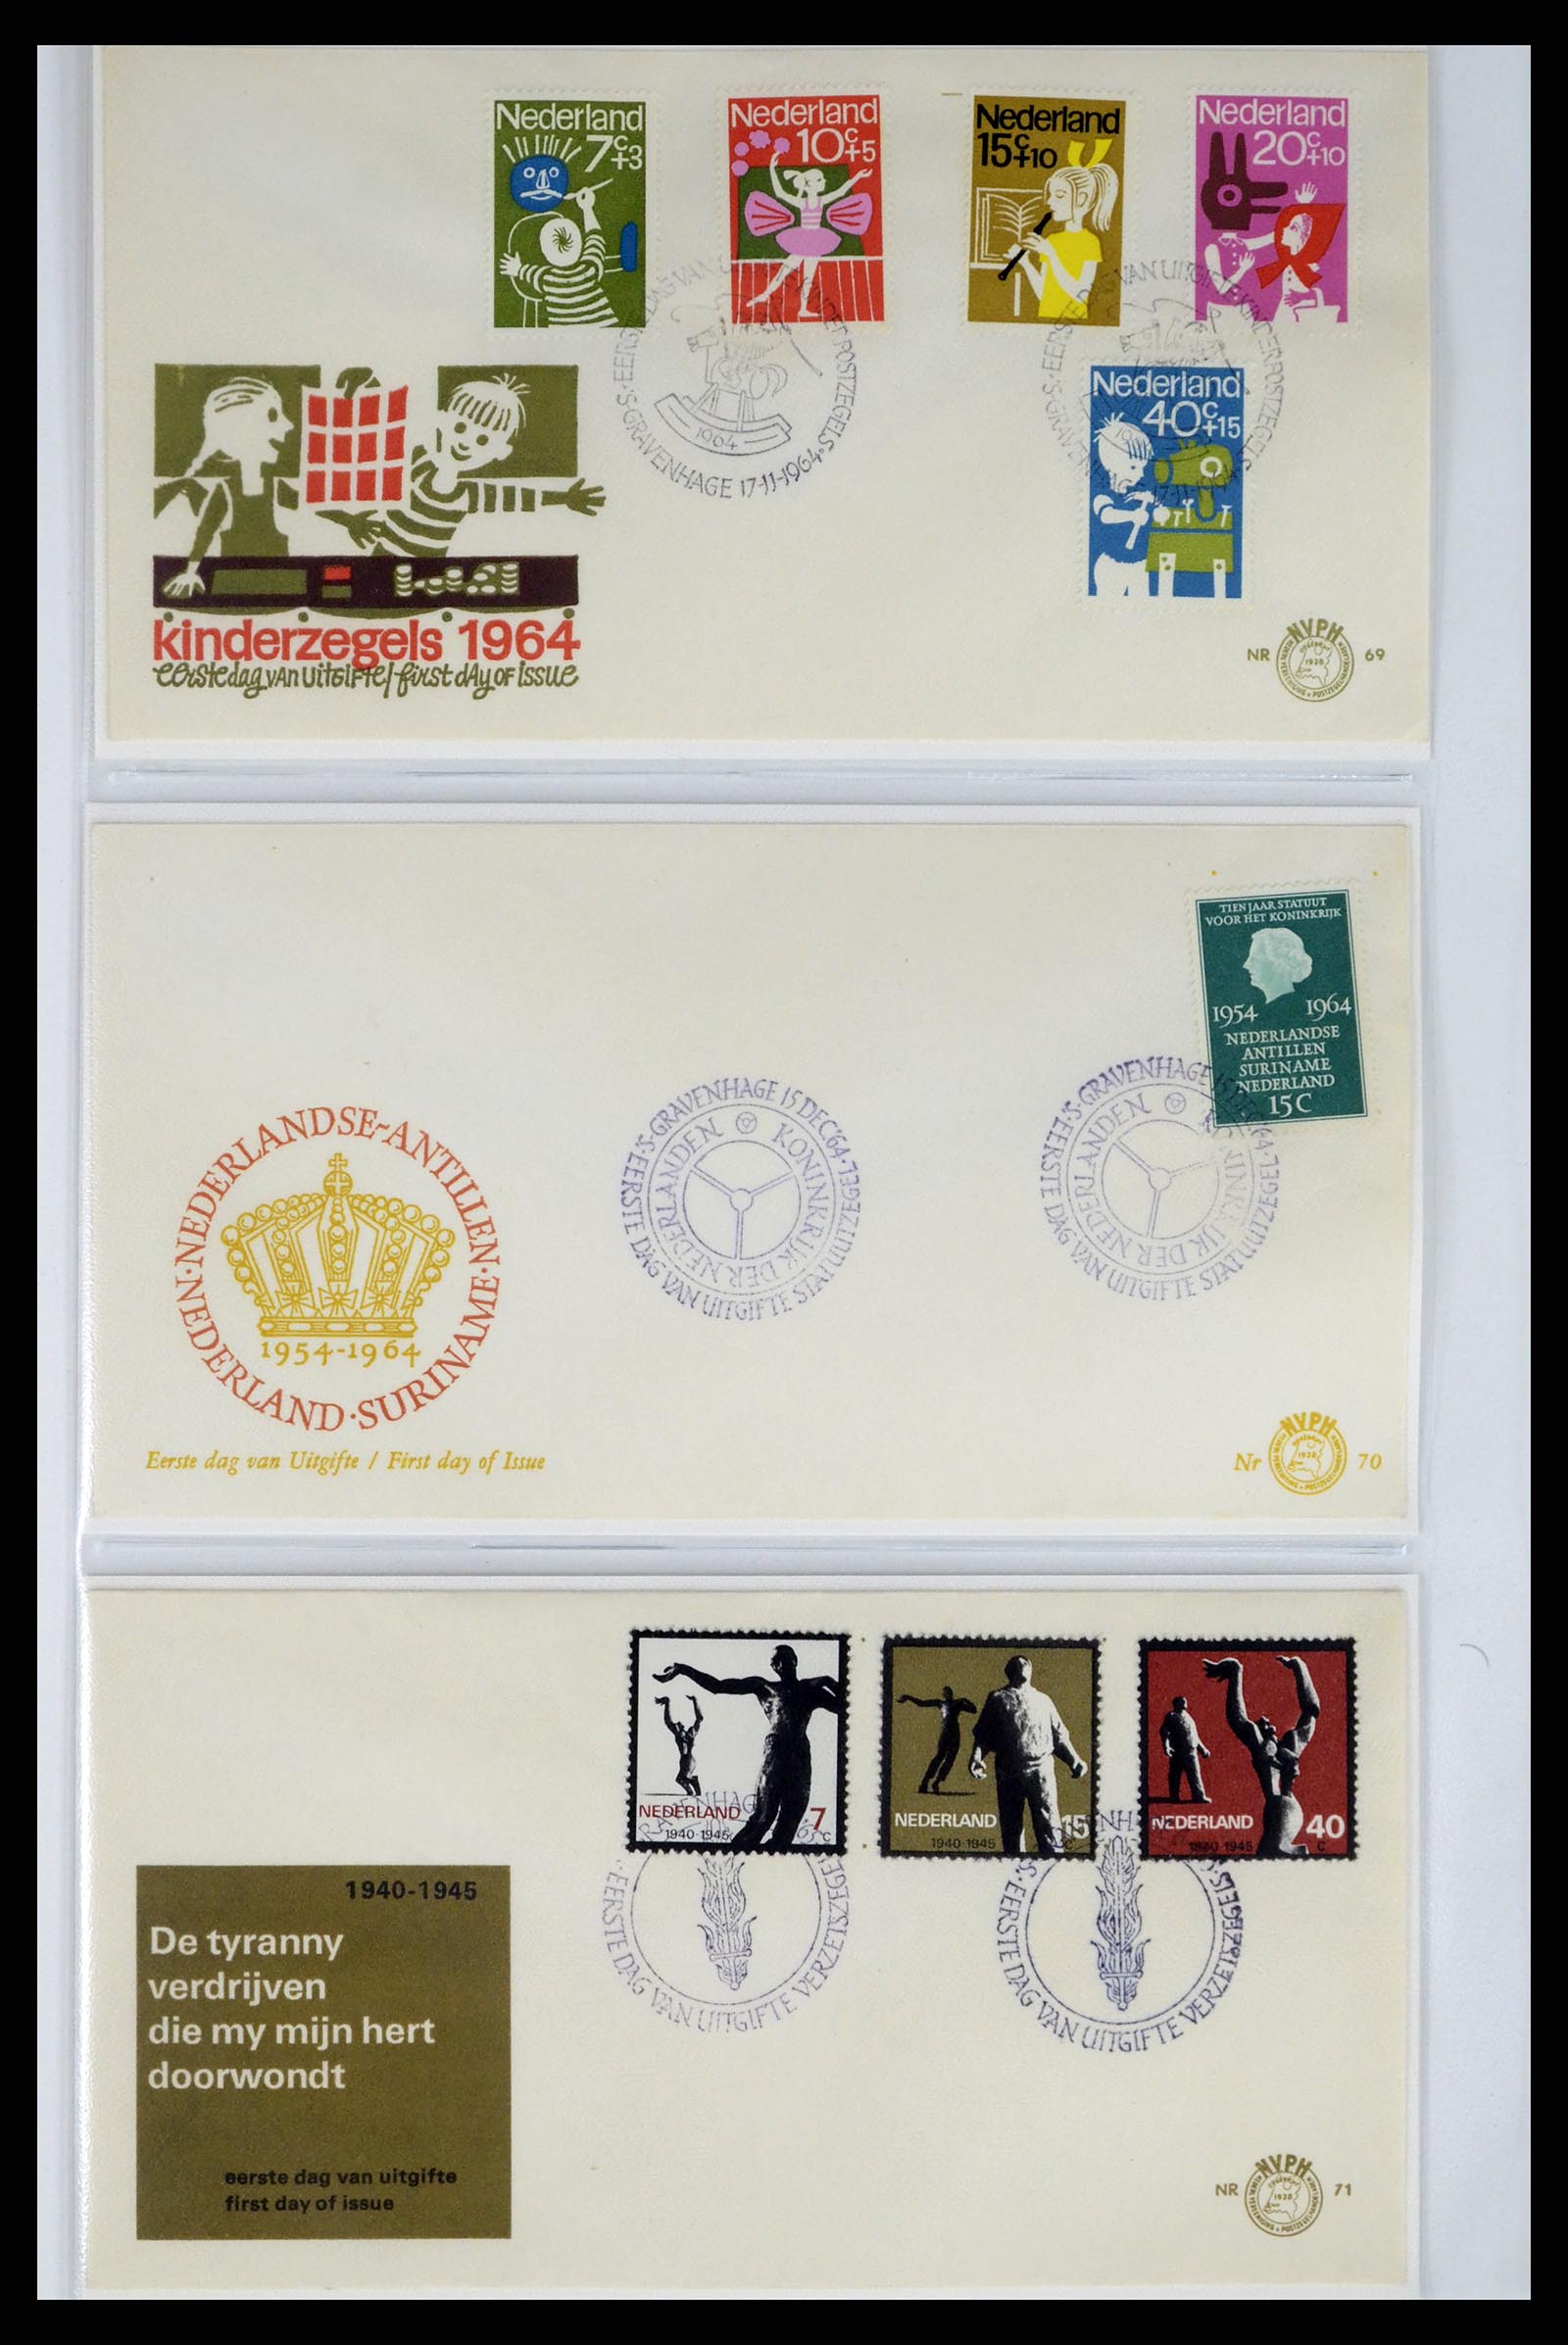 37983 017 - Stamp Collection 37983 Netherland FDC's 1954-1987.